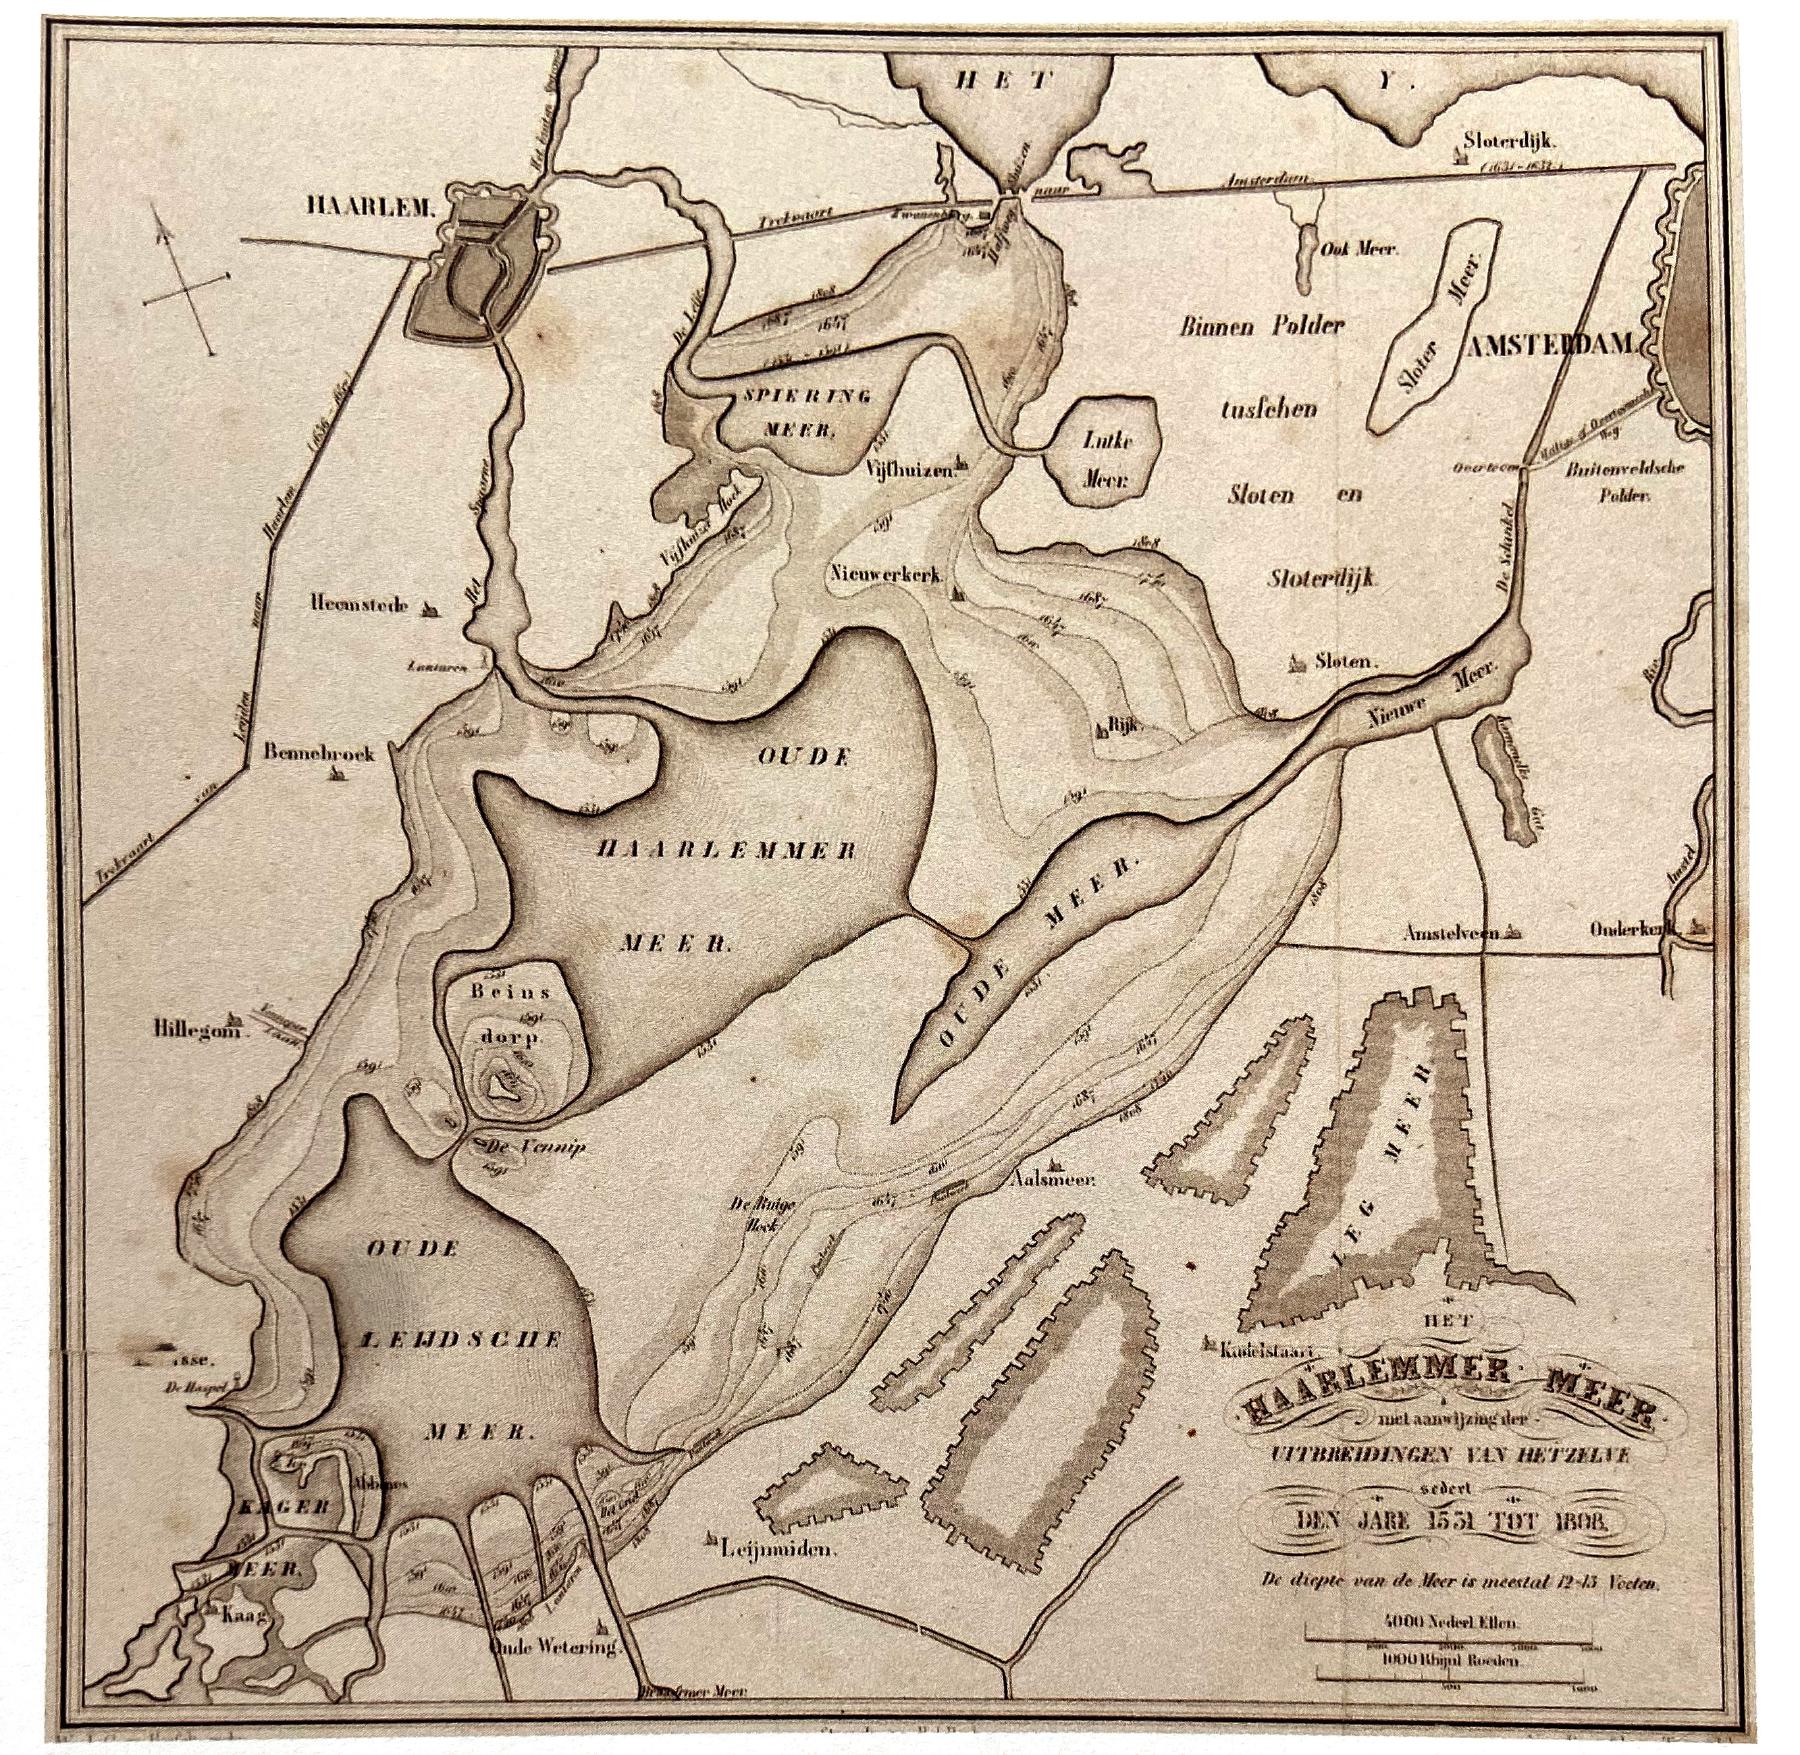 A map of the growth of Harlermermeer from the 15th to the 19th century, where it has tripled or more in size.